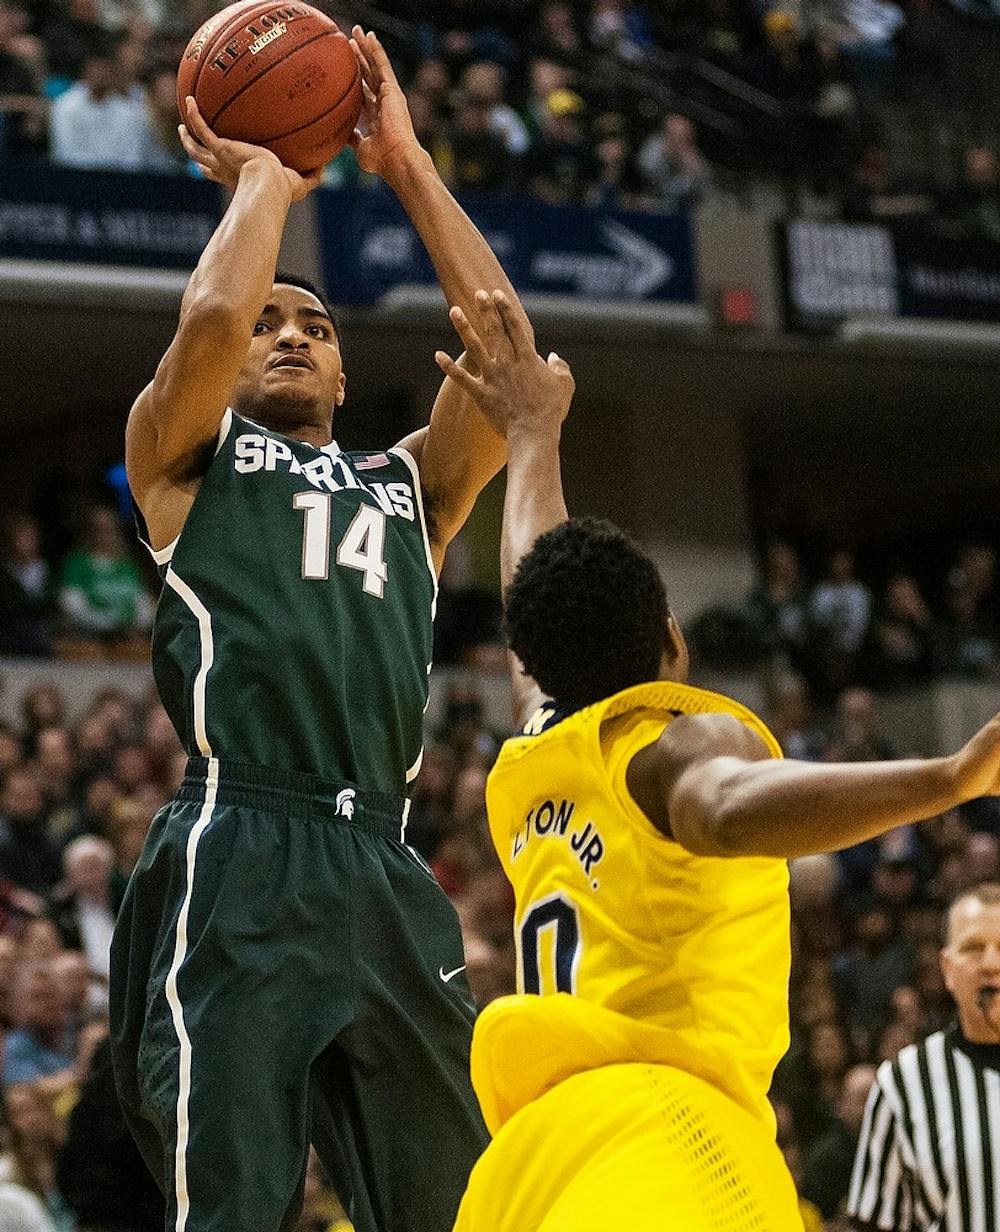 <p>Sophomore guard Gary Harris attempts a point over Michigan guard Derrick Walton Jr. on March 16, 2014, during the final against Michigan at the Big 10 Championship at Bankers Life Fieldhouse in Indianapolis. The Spartans won, 69-55. Erin Hampton/The State News</p>